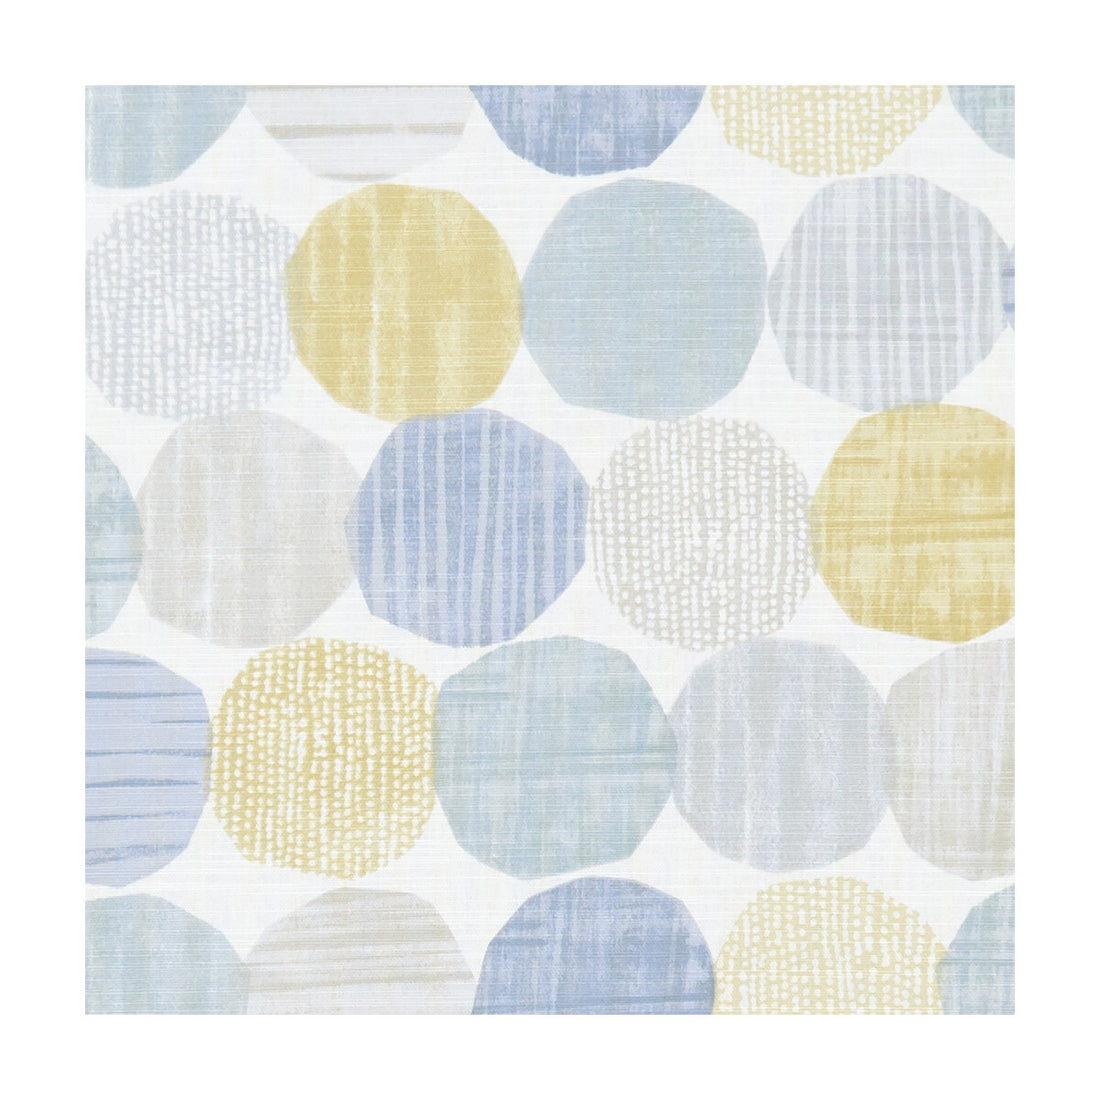 Stepping Stones fabric in chambray/honey color - pattern F1235/01.CAC.0 - by Clarke And Clarke in the Roof Garden By Studio G For C&amp;C collection